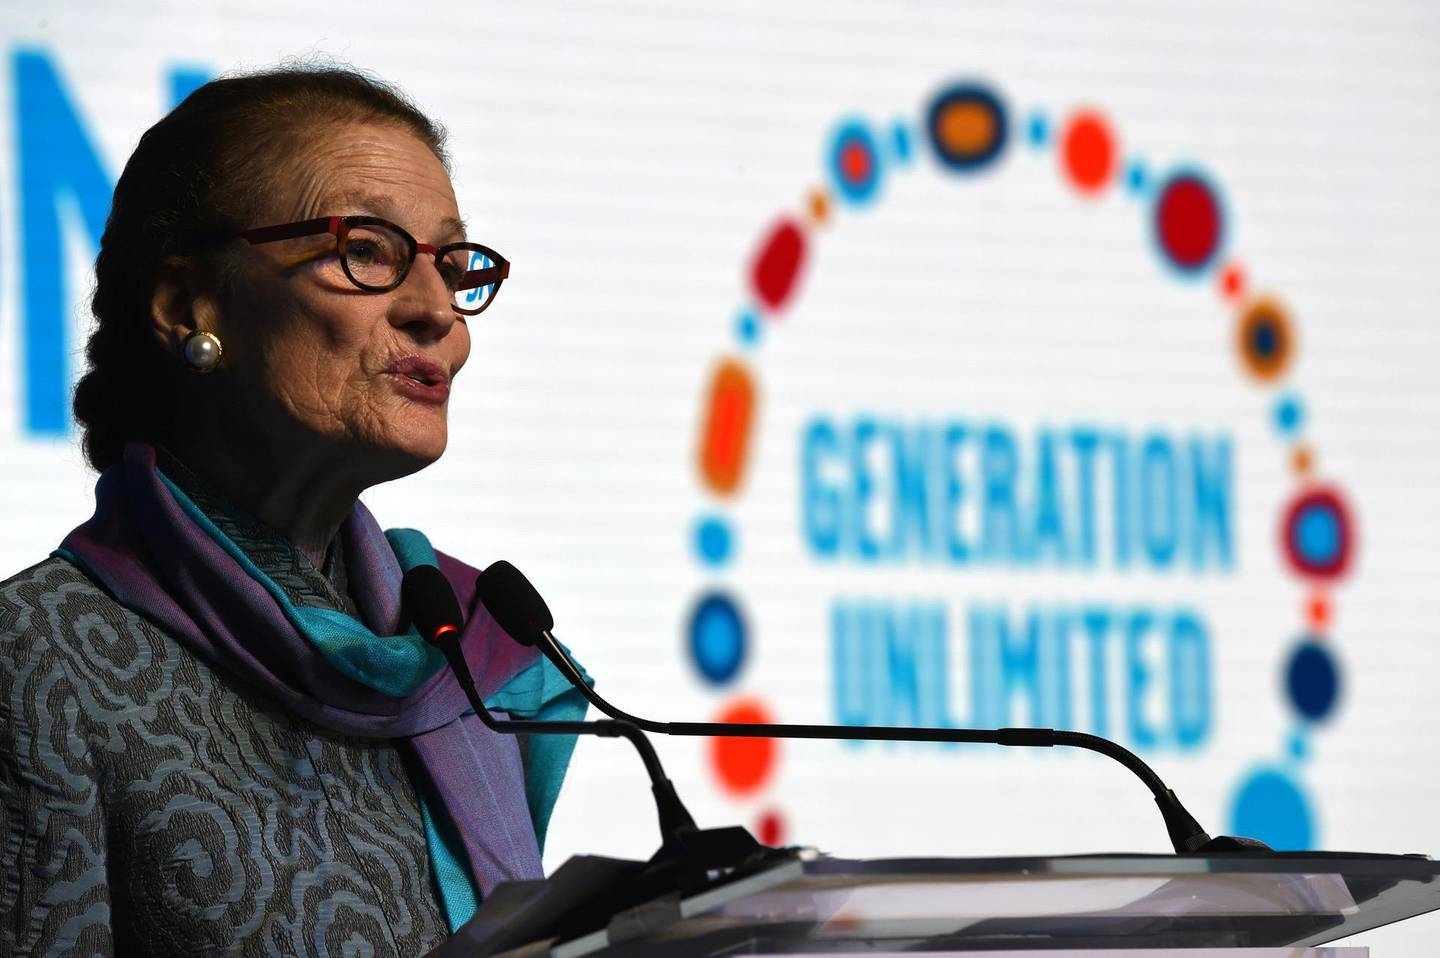 UNICEF Executive Director Henrietta H. Fore delivers the inaugural speech at the South Asia Youth Skills and Solutions Forum in Mumbai on October 30, 2019. (Photo by INDRANIL MUKHERJEE / AFP)